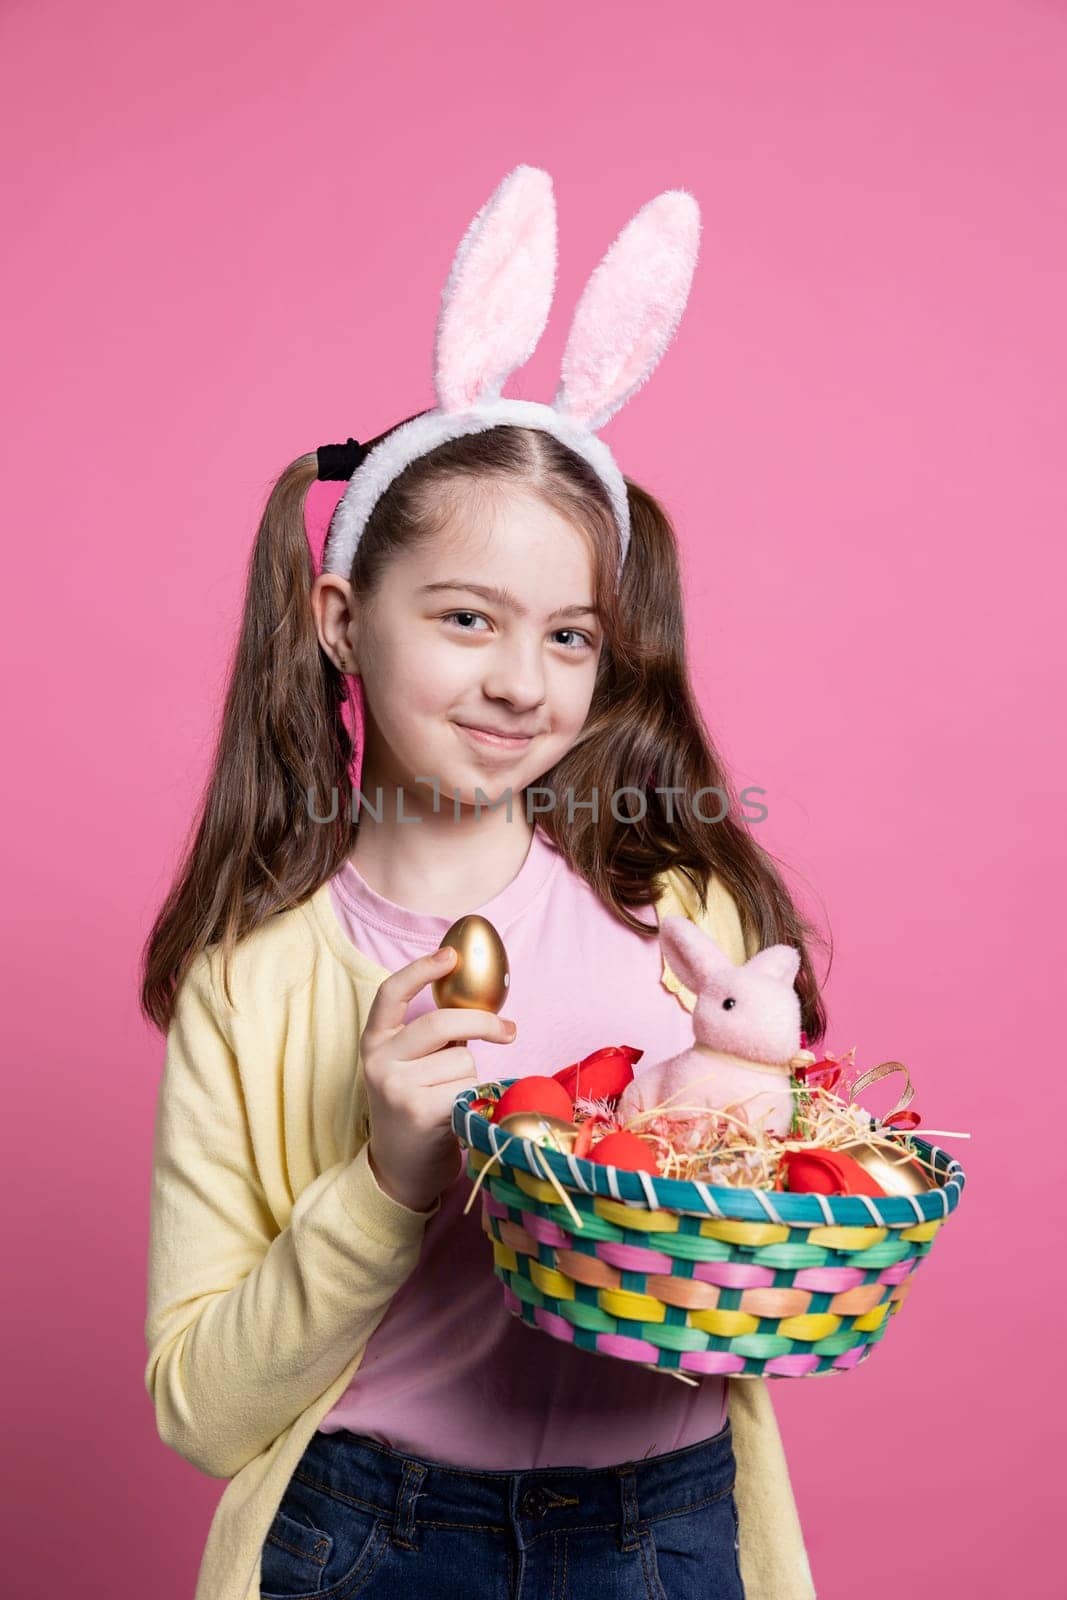 Smiling cute little girl showing colorful eggs and rabbit toy in an arrangement by DCStudio